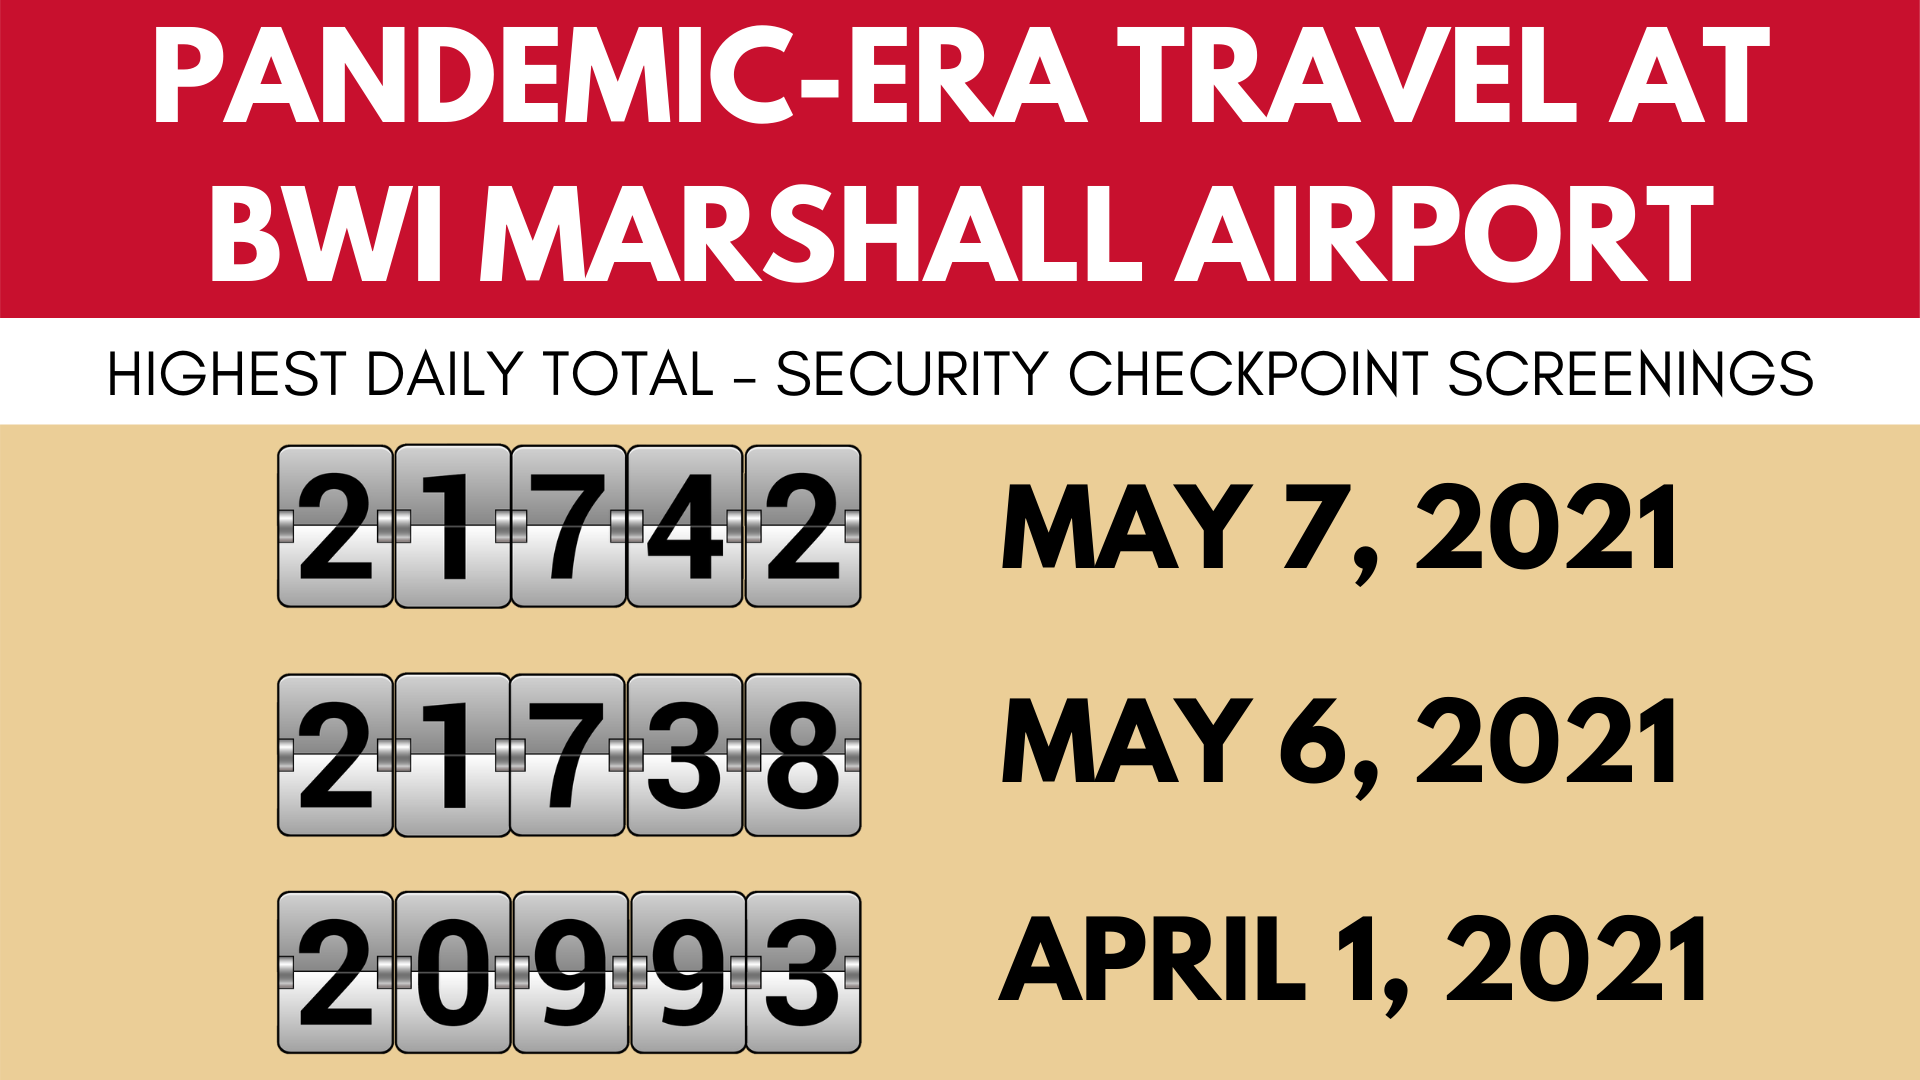 Graphic indicating the 3 busiest days of security checkpoint screening at BWI Marshall Airport during the pandemic era.